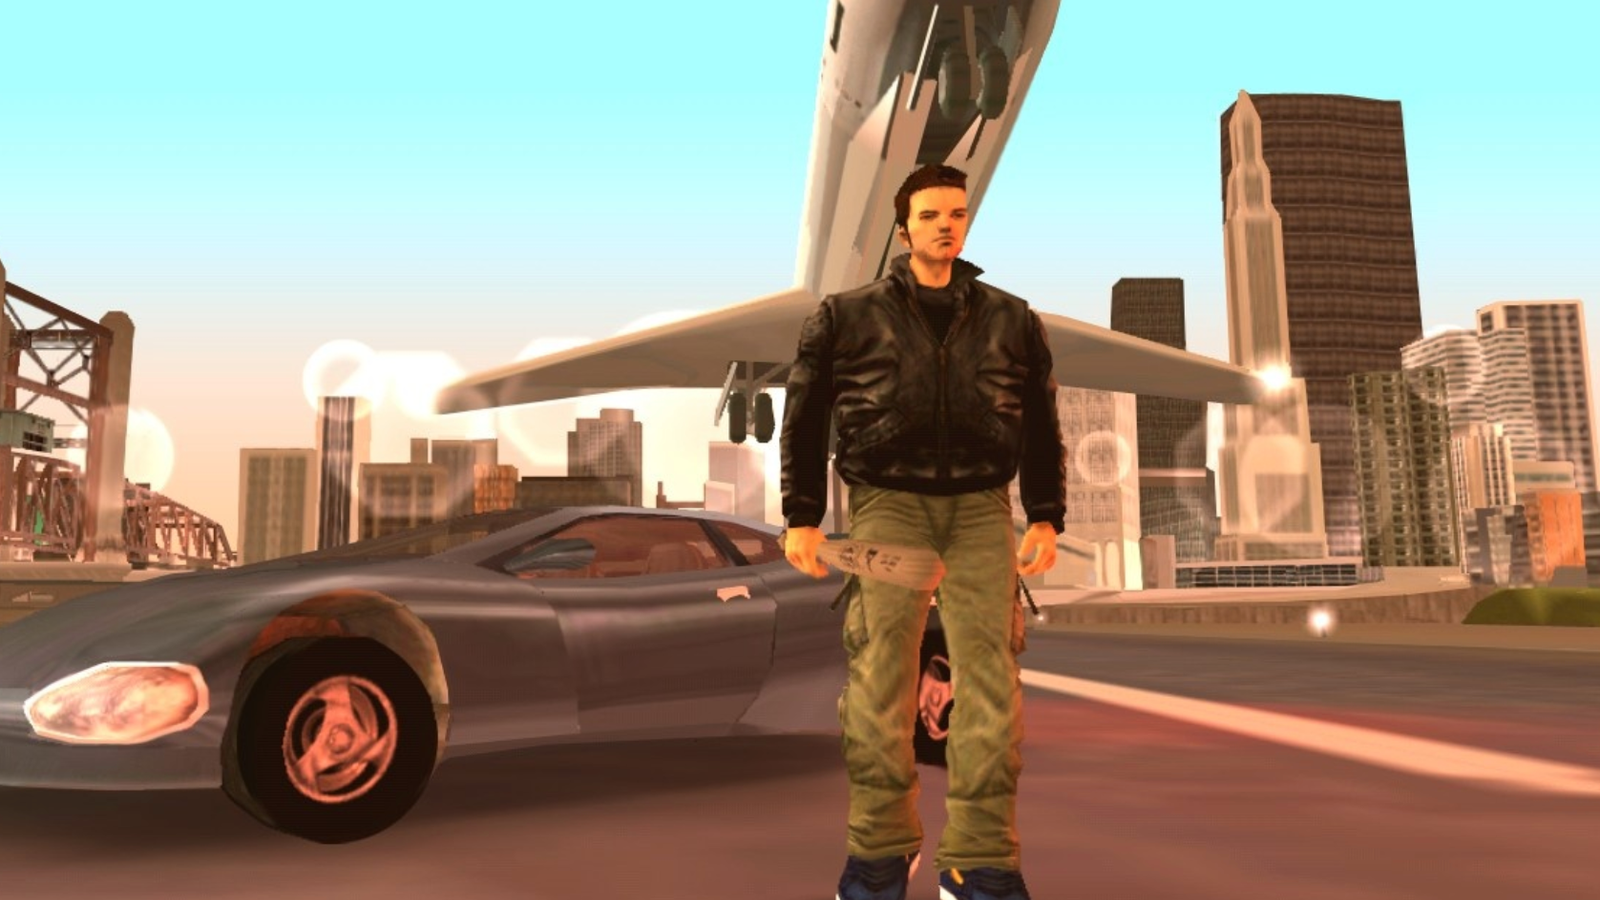 5 rarest vehicles in GTA 3 that one can find in Liberty City